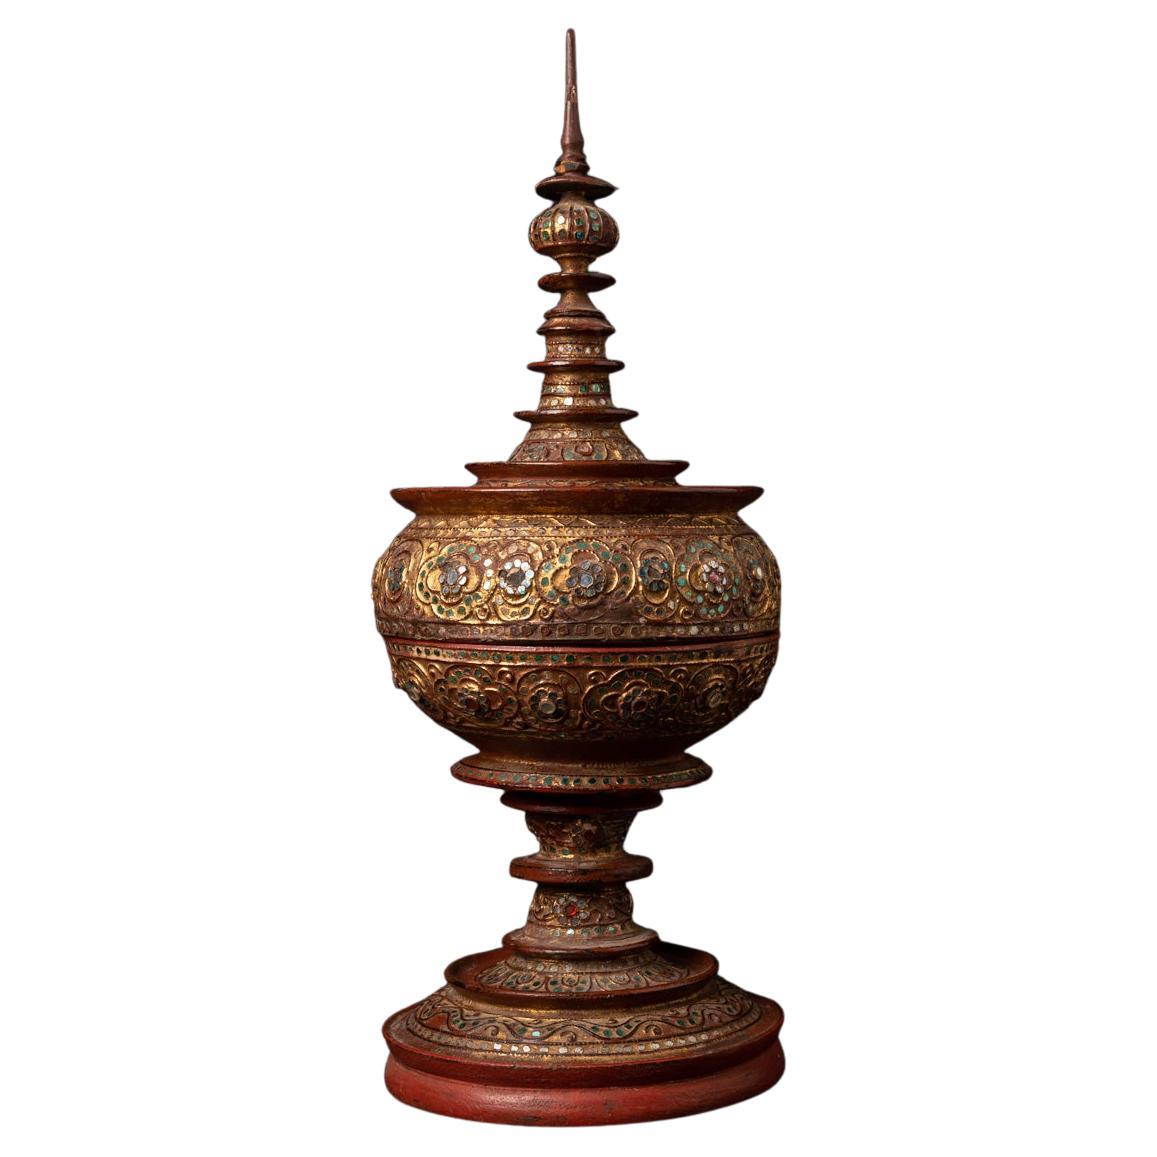 19th century Mandalay style antique wooden Burmese offering vessel For Sale